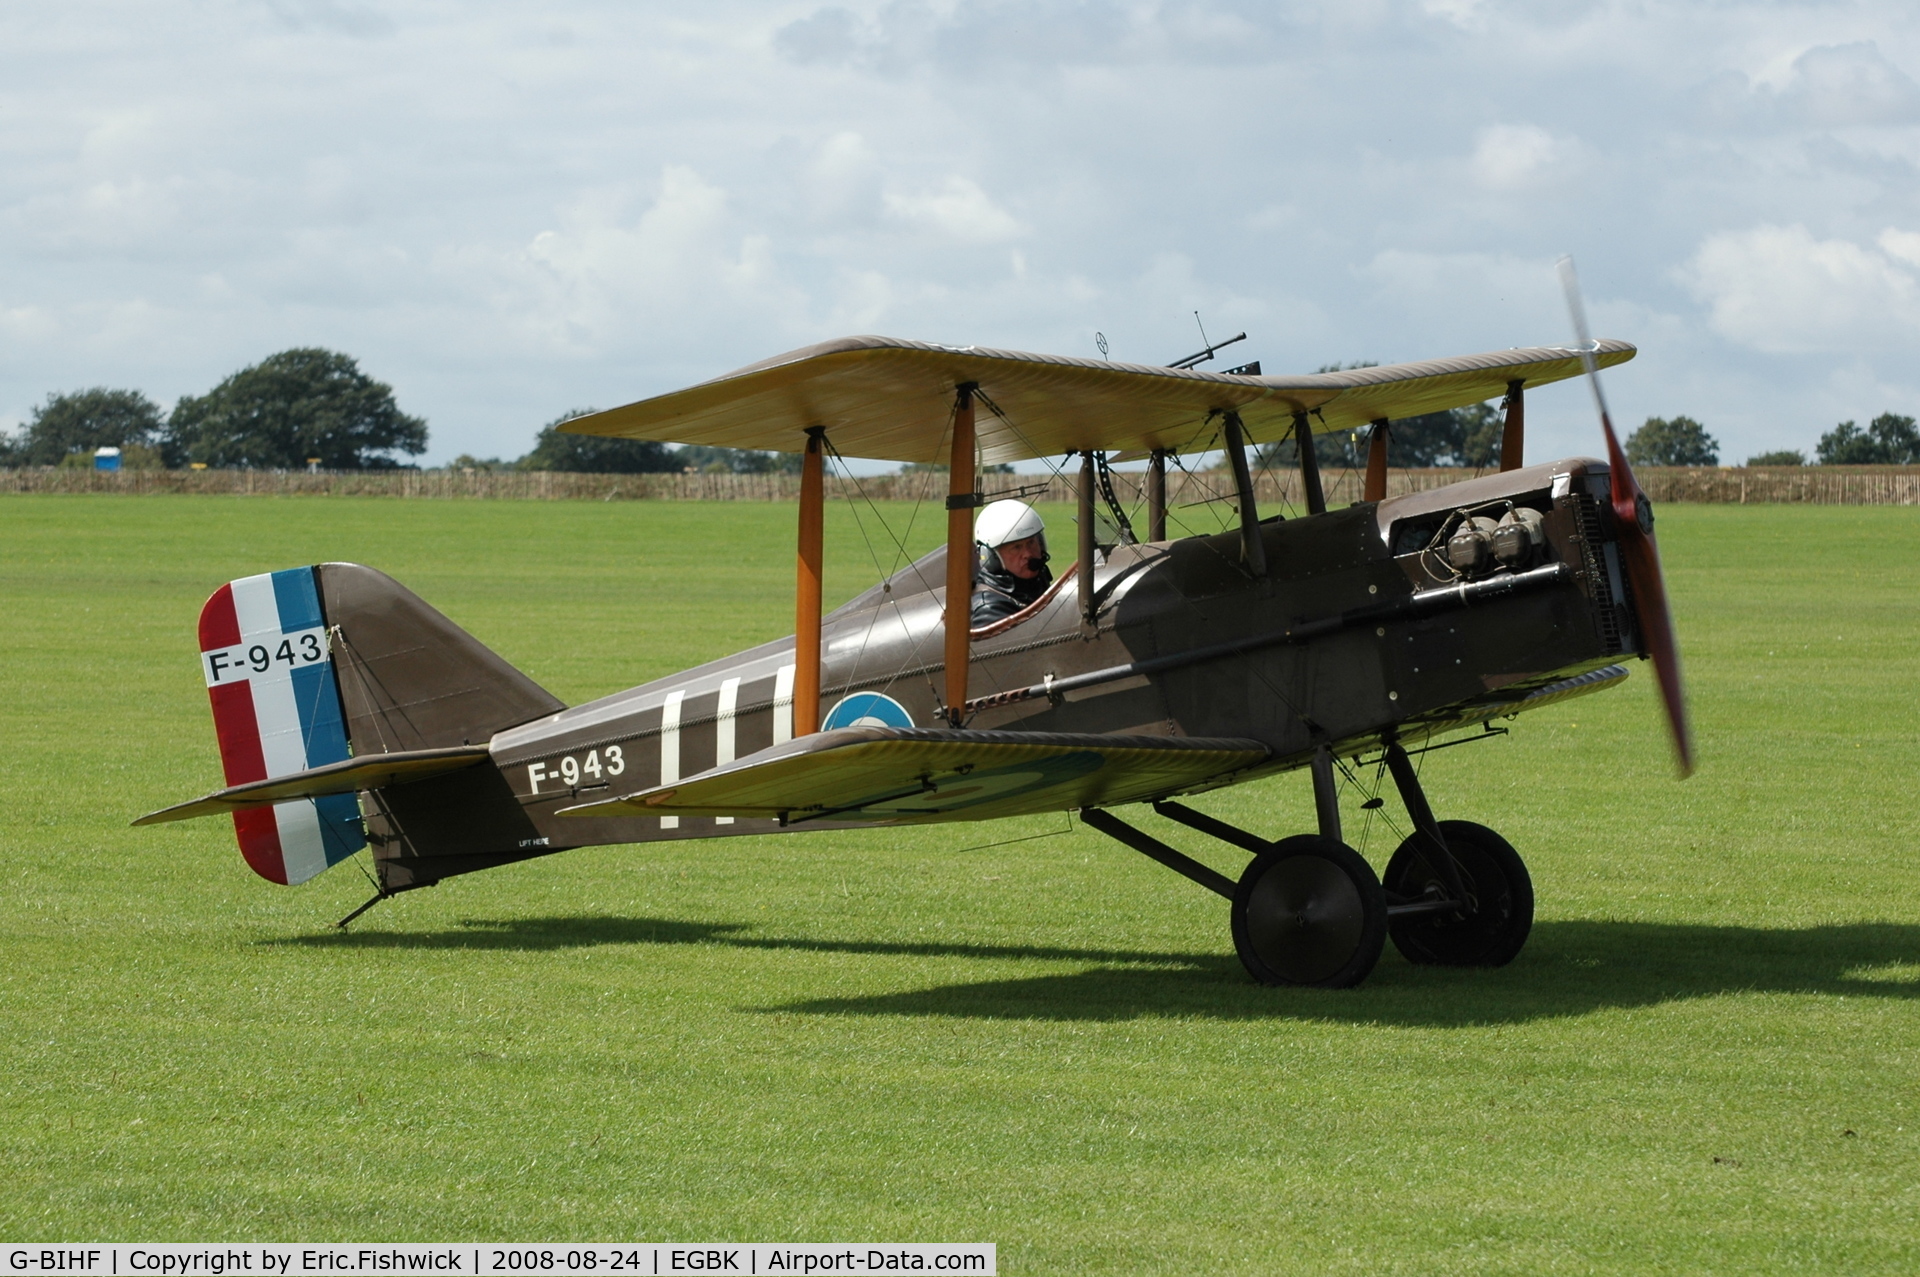 G-BIHF, 1983 Royal Aircraft Factory SE-5A Replica C/N PFA 020-10548, 2. F-943 at Sywell Airshow 24 Aug 2008 (Yorkshire Air Museum)